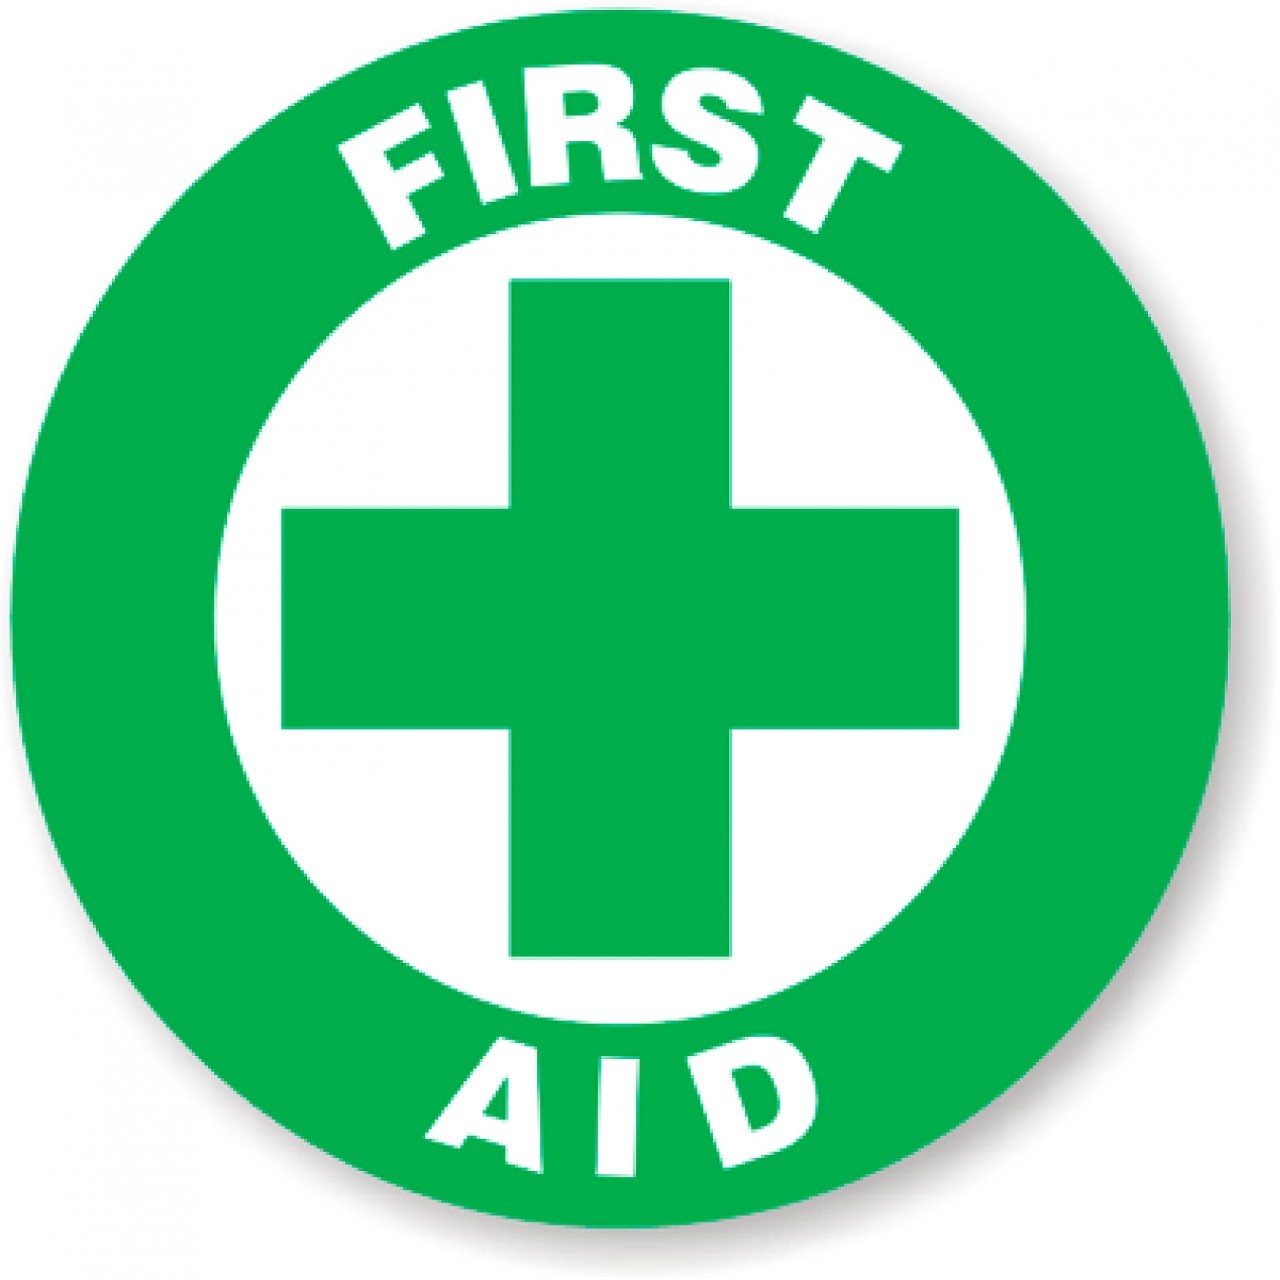 First Aid Signage - ClipArt Best